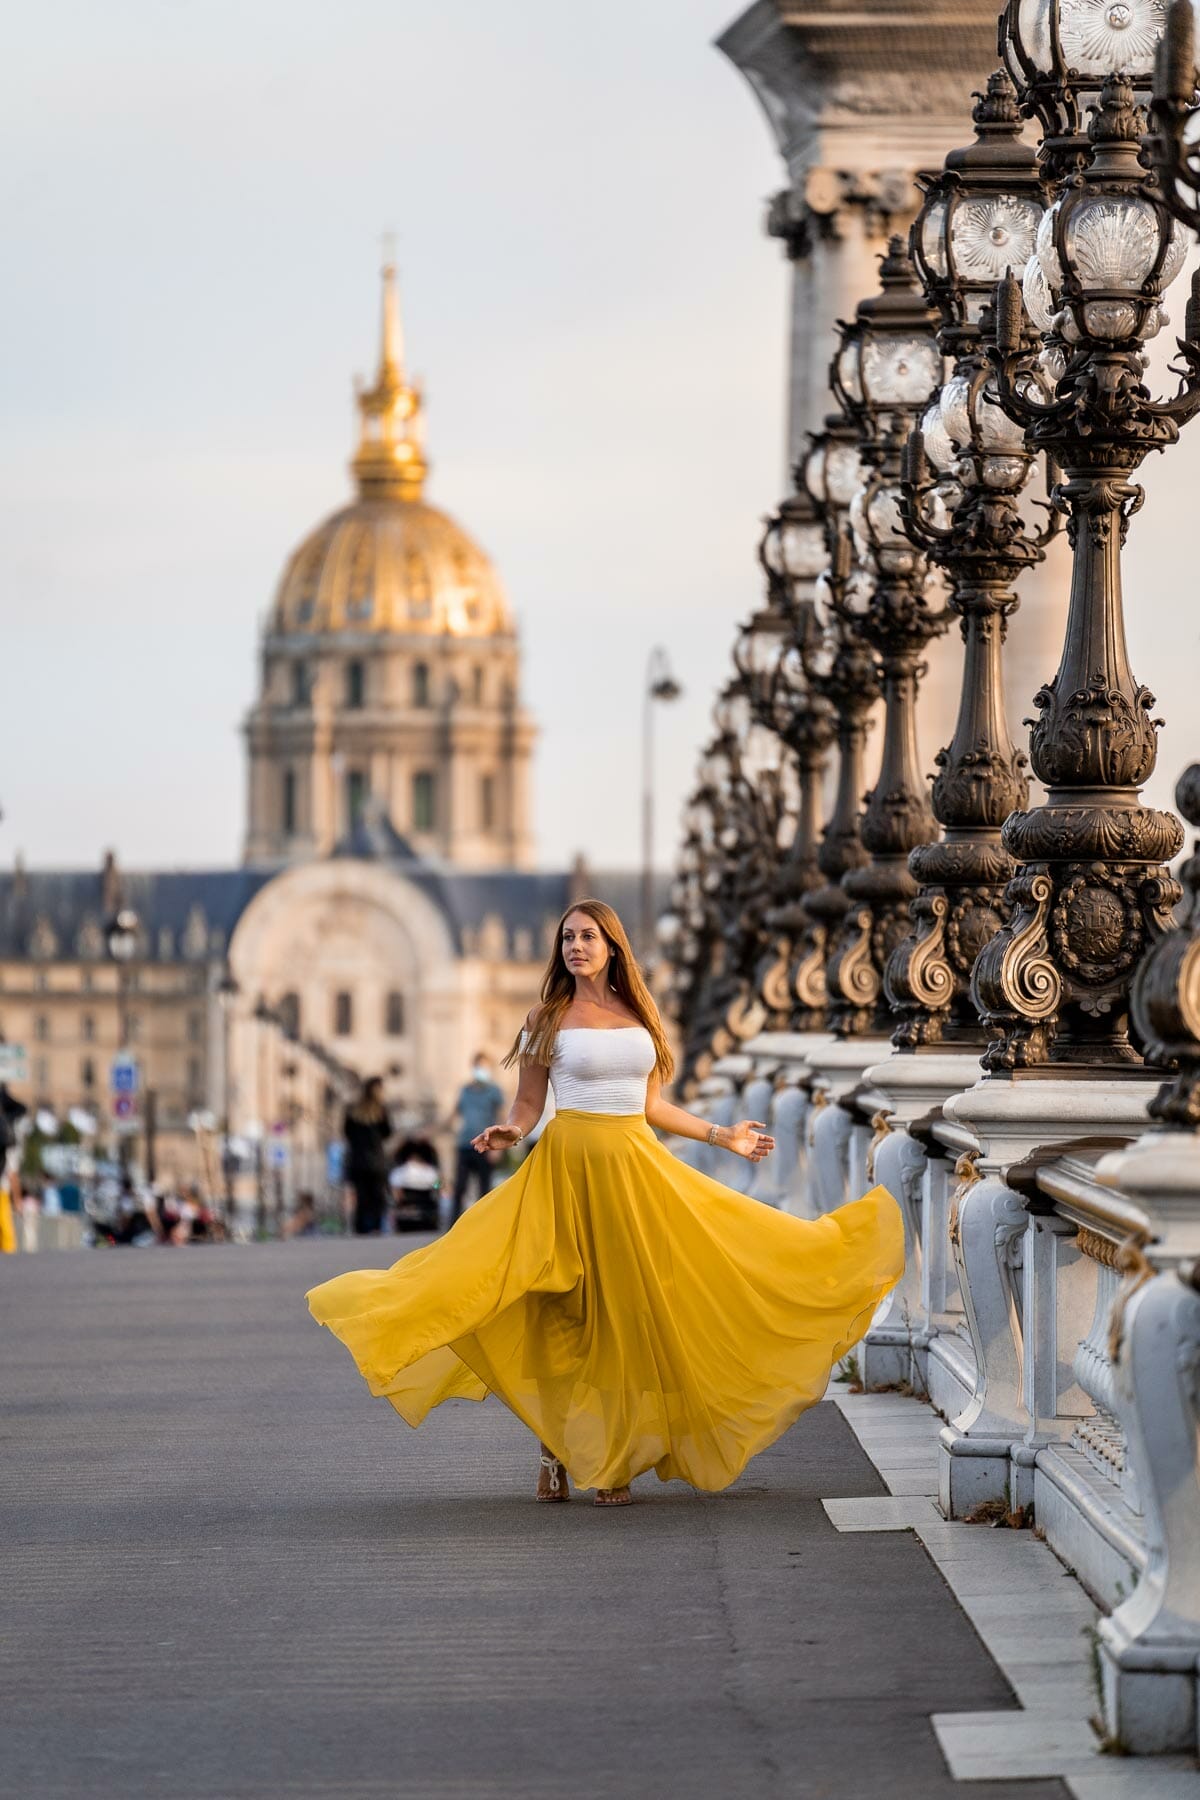 Girl in a pink dress twirling at Pont Alexandre III which is one of the most instagrammable places in Paris